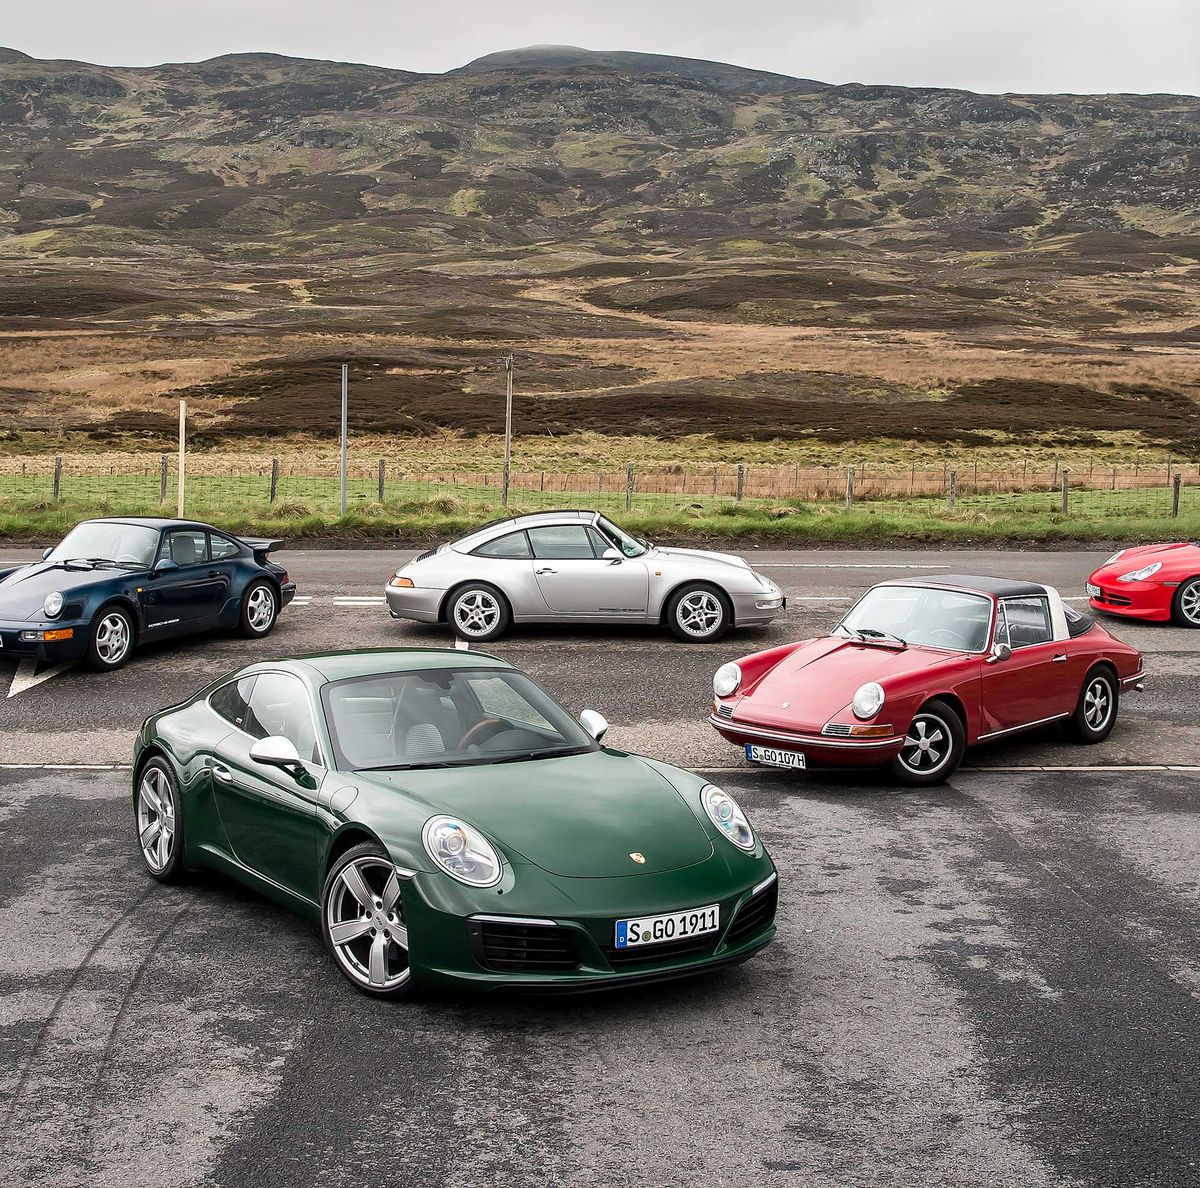 Porsche 911 Buyer's Guide: Every Generation From Original to 992